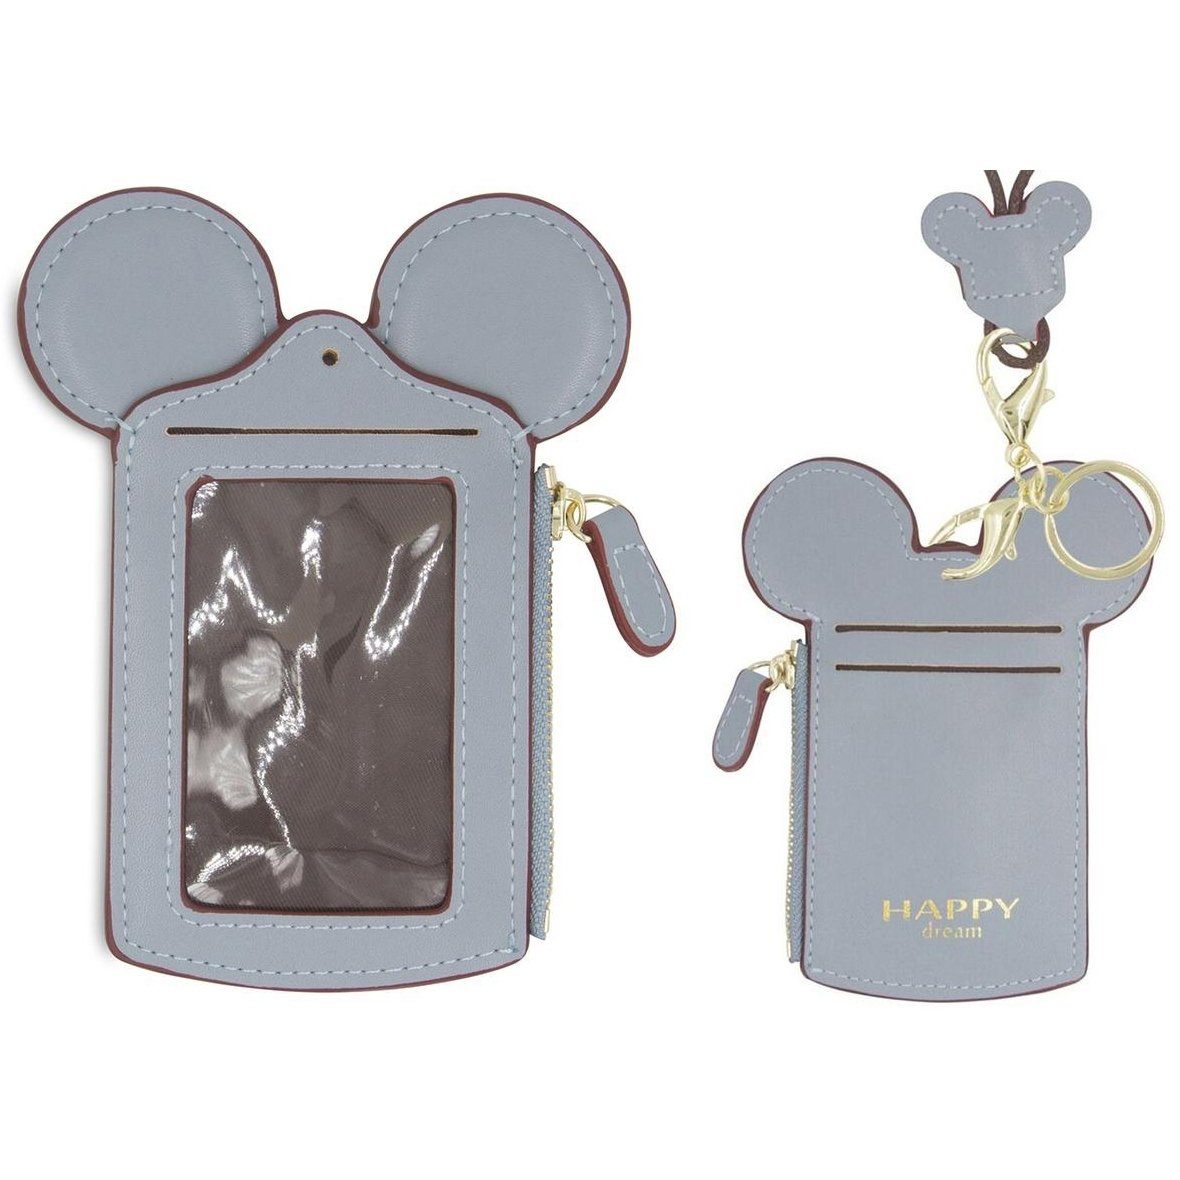 Theme Park Ticket and ID Card Holder - Assorted Colors / Blue